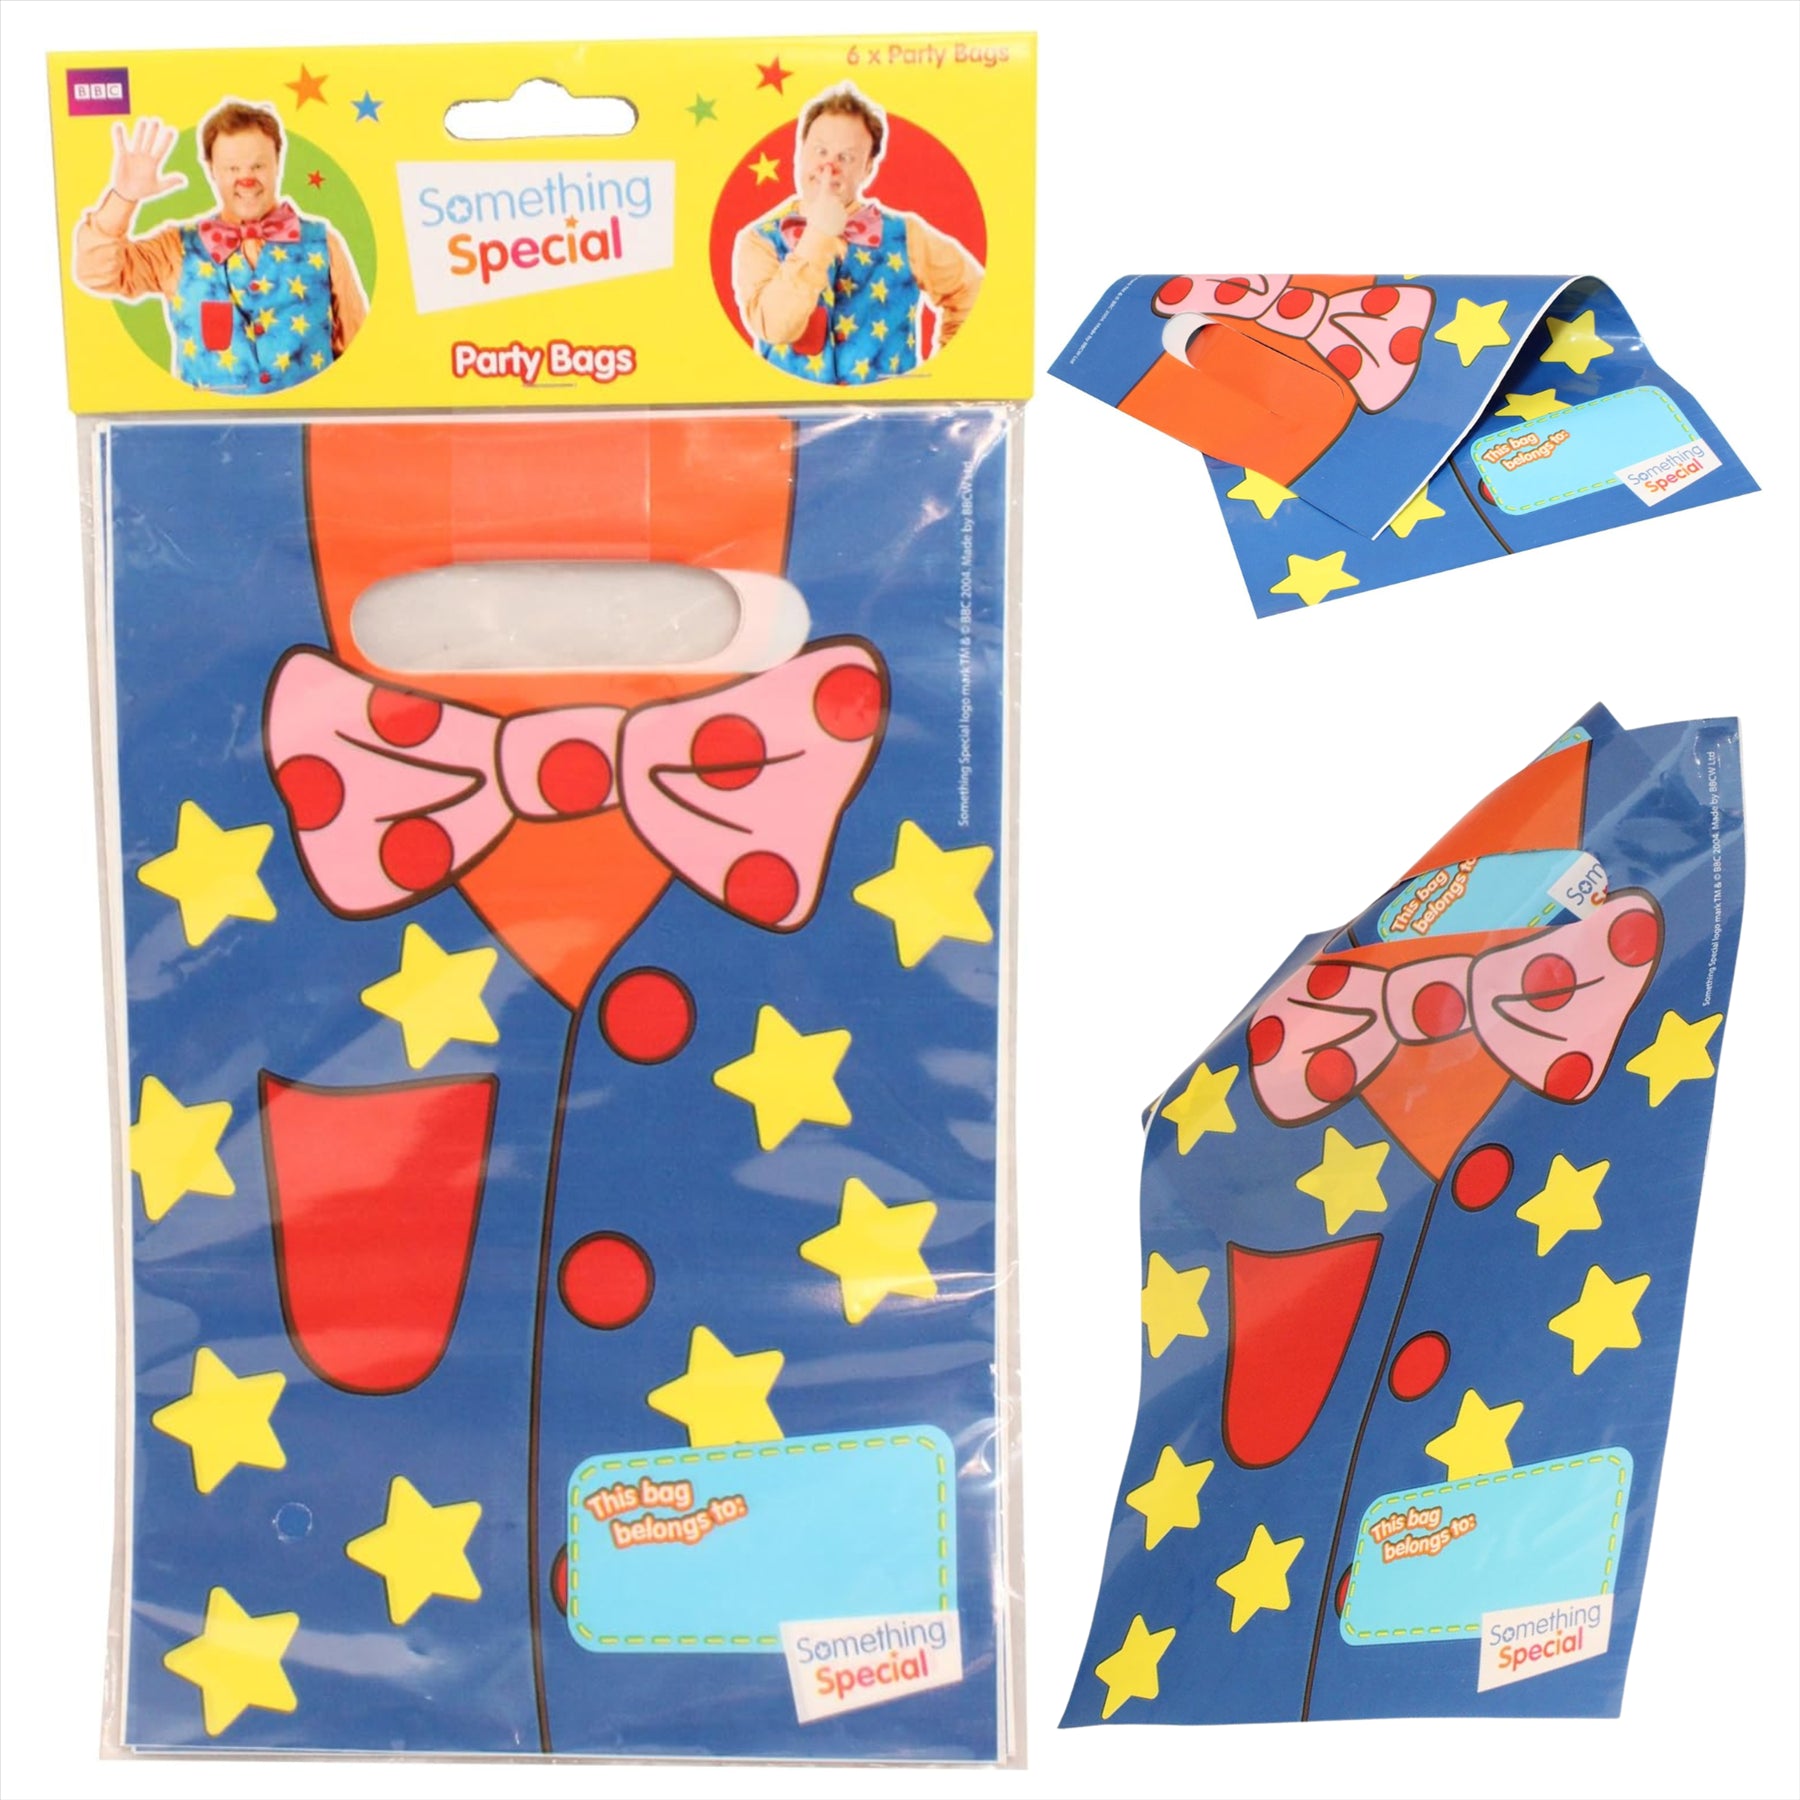 Something Special Mr Tumble Childrens Partyware - Pack of 18 Party Bags - Toptoys2u